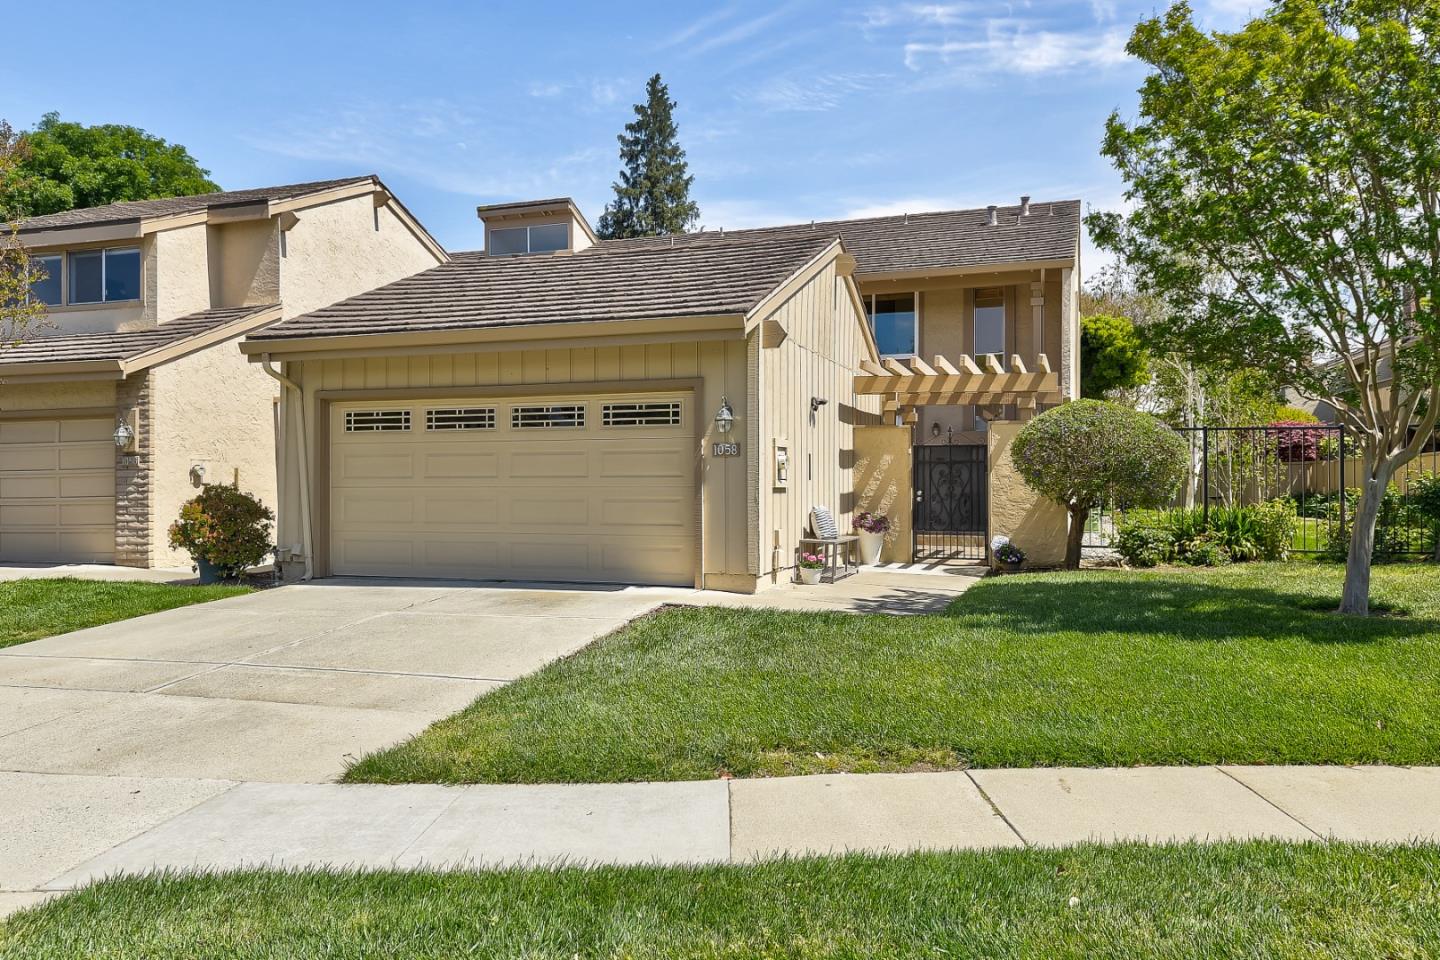 Photo of 1058 Miller Ave in San Jose, CA